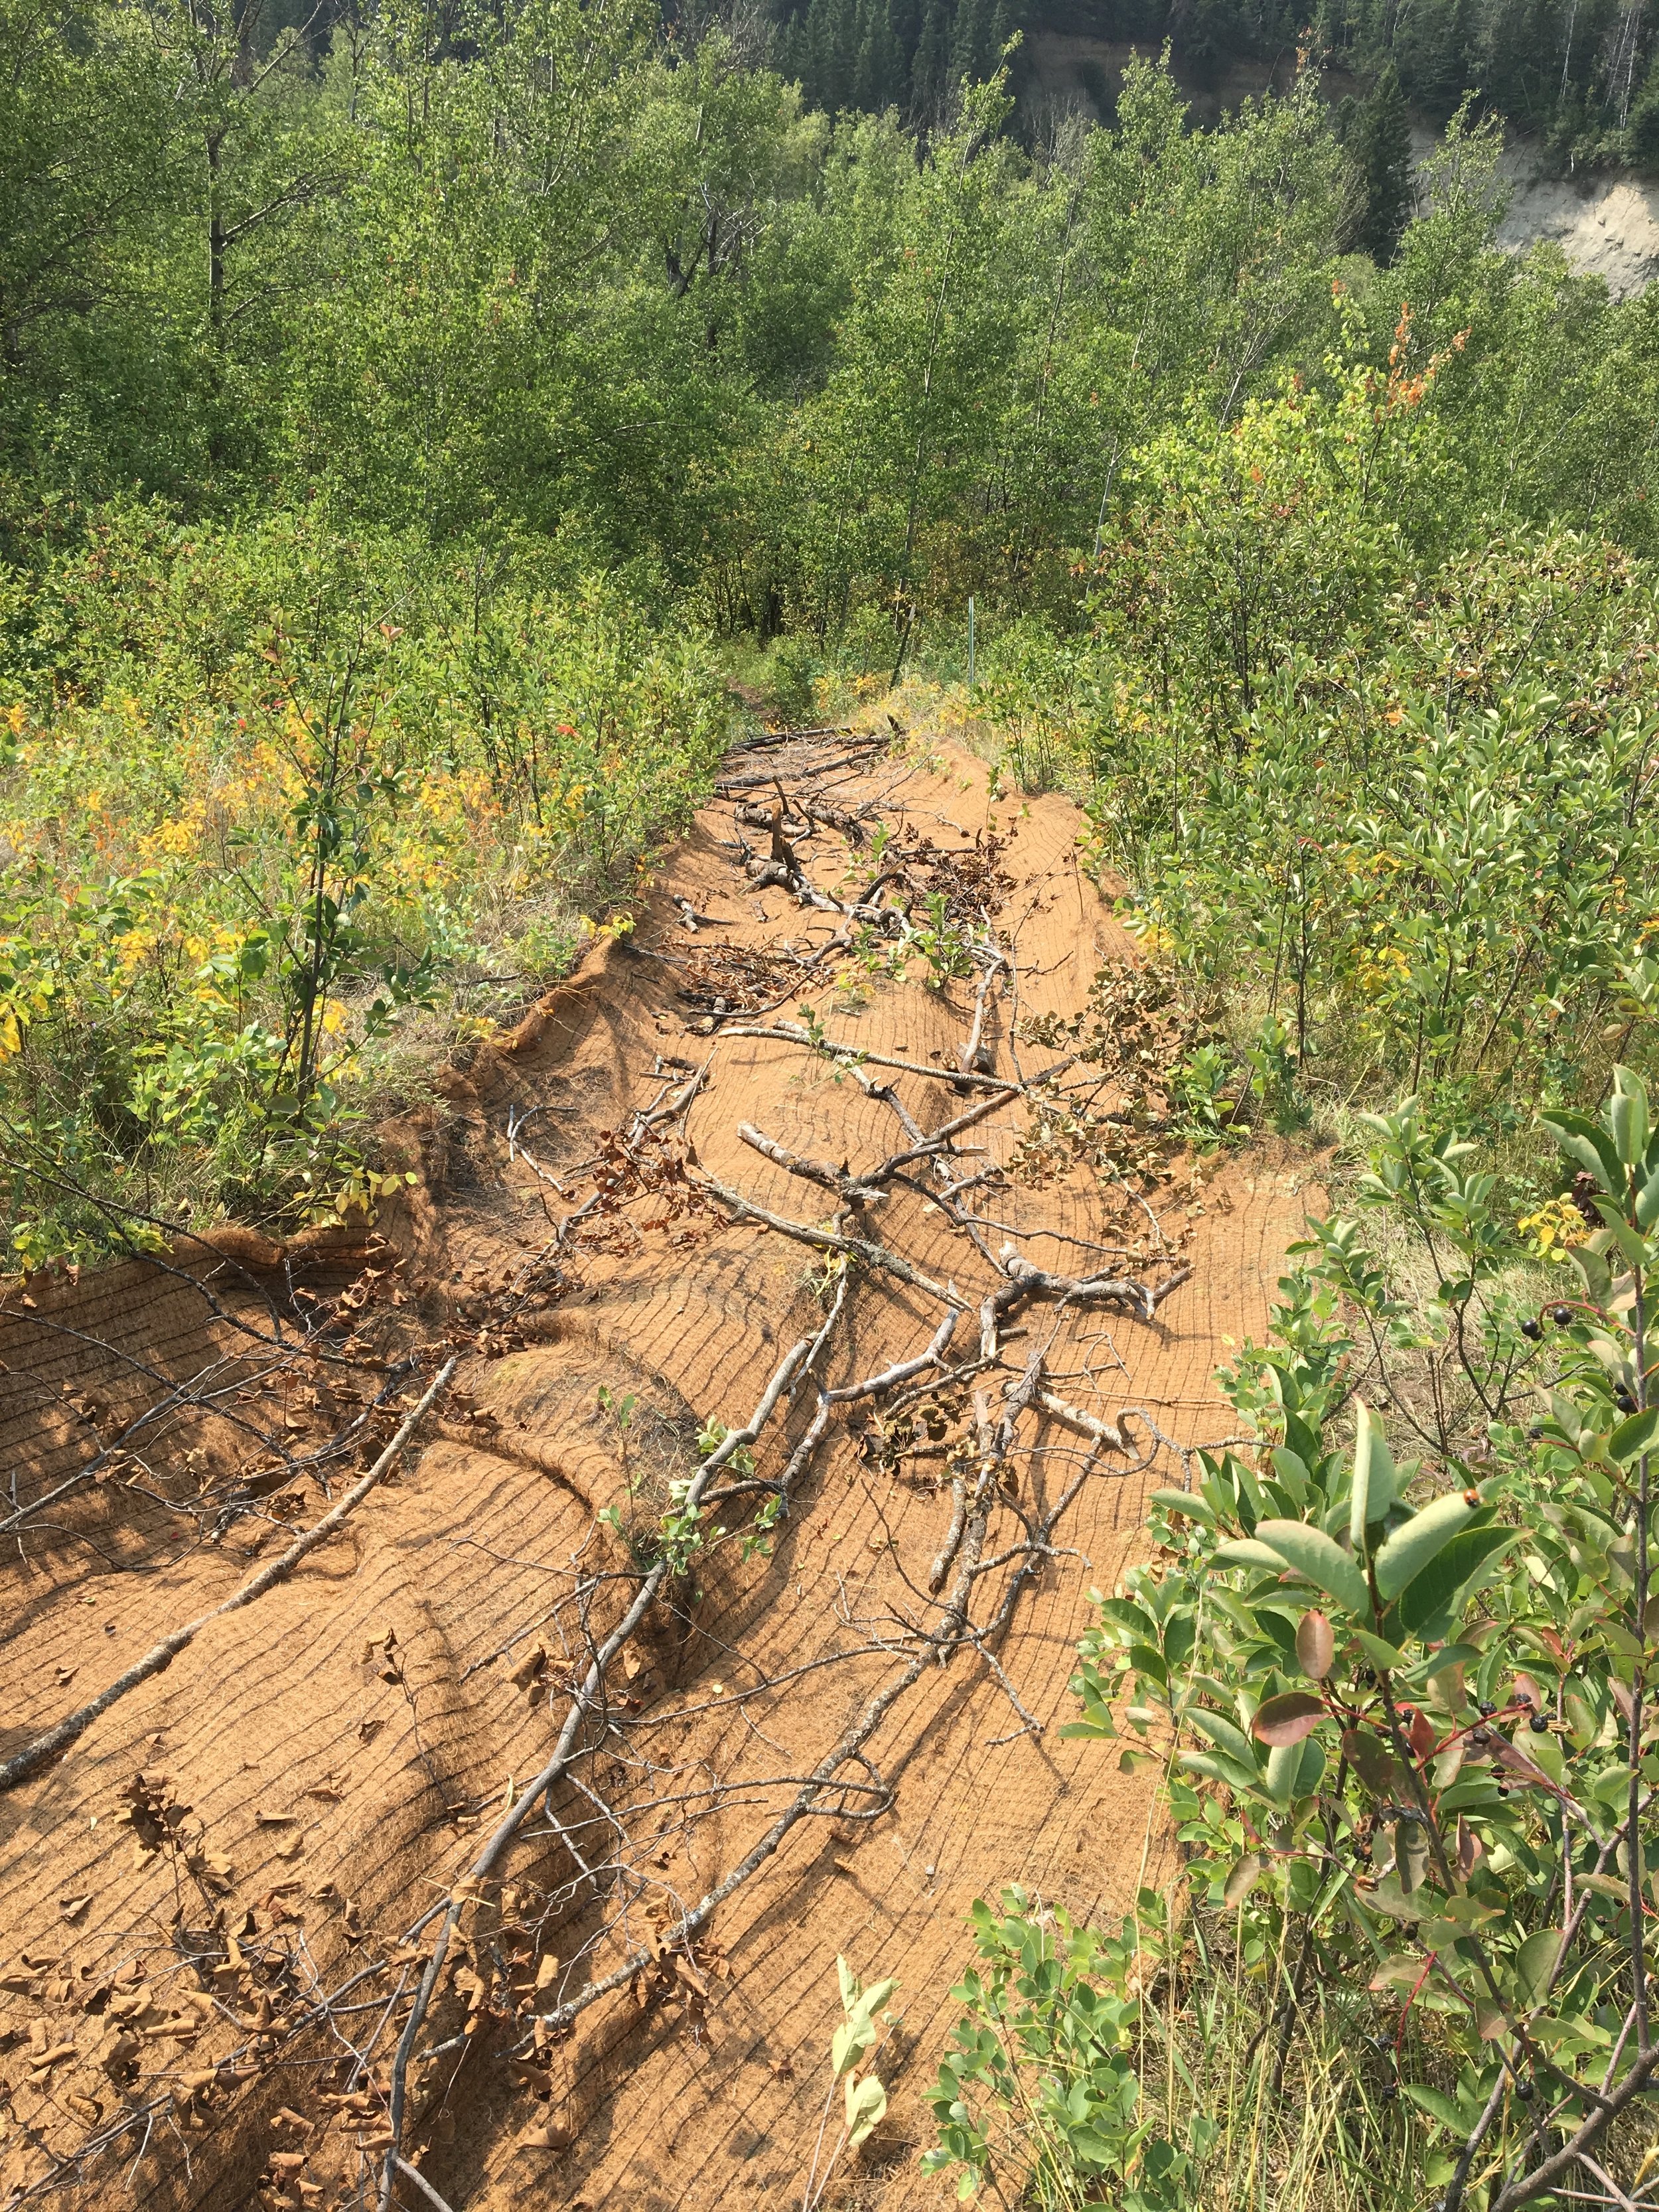 Volunteers restored the old eroded trail at Coates